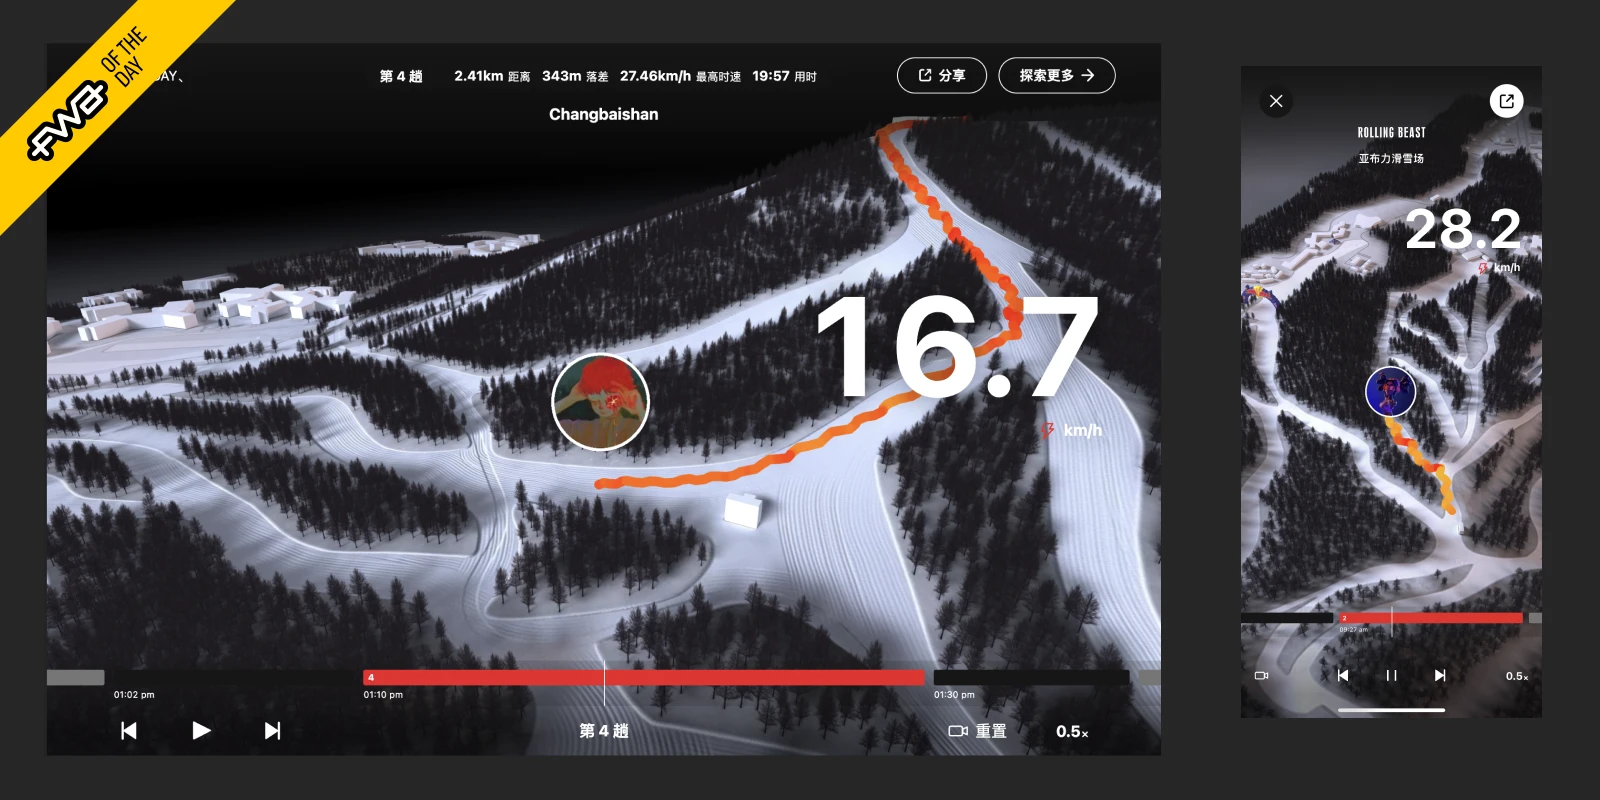 rolling beast ski tracking app by Digital Creative wins FOW of the day